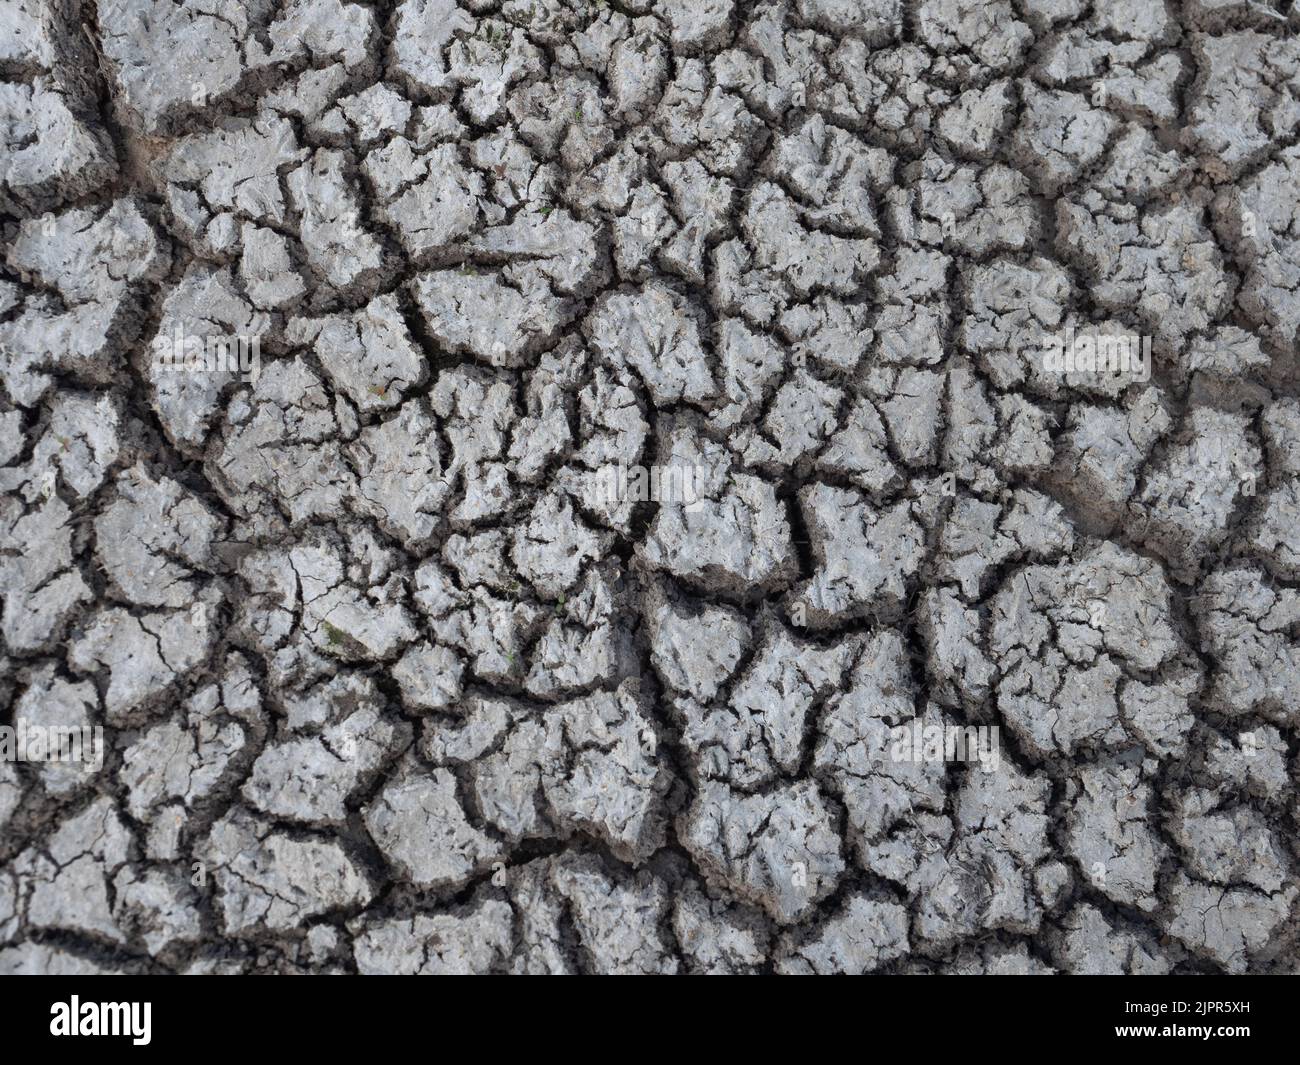 Dry, cracked earth with photographed from above at Bear Branch Reservoir in Spring, Texas. Stock Photo